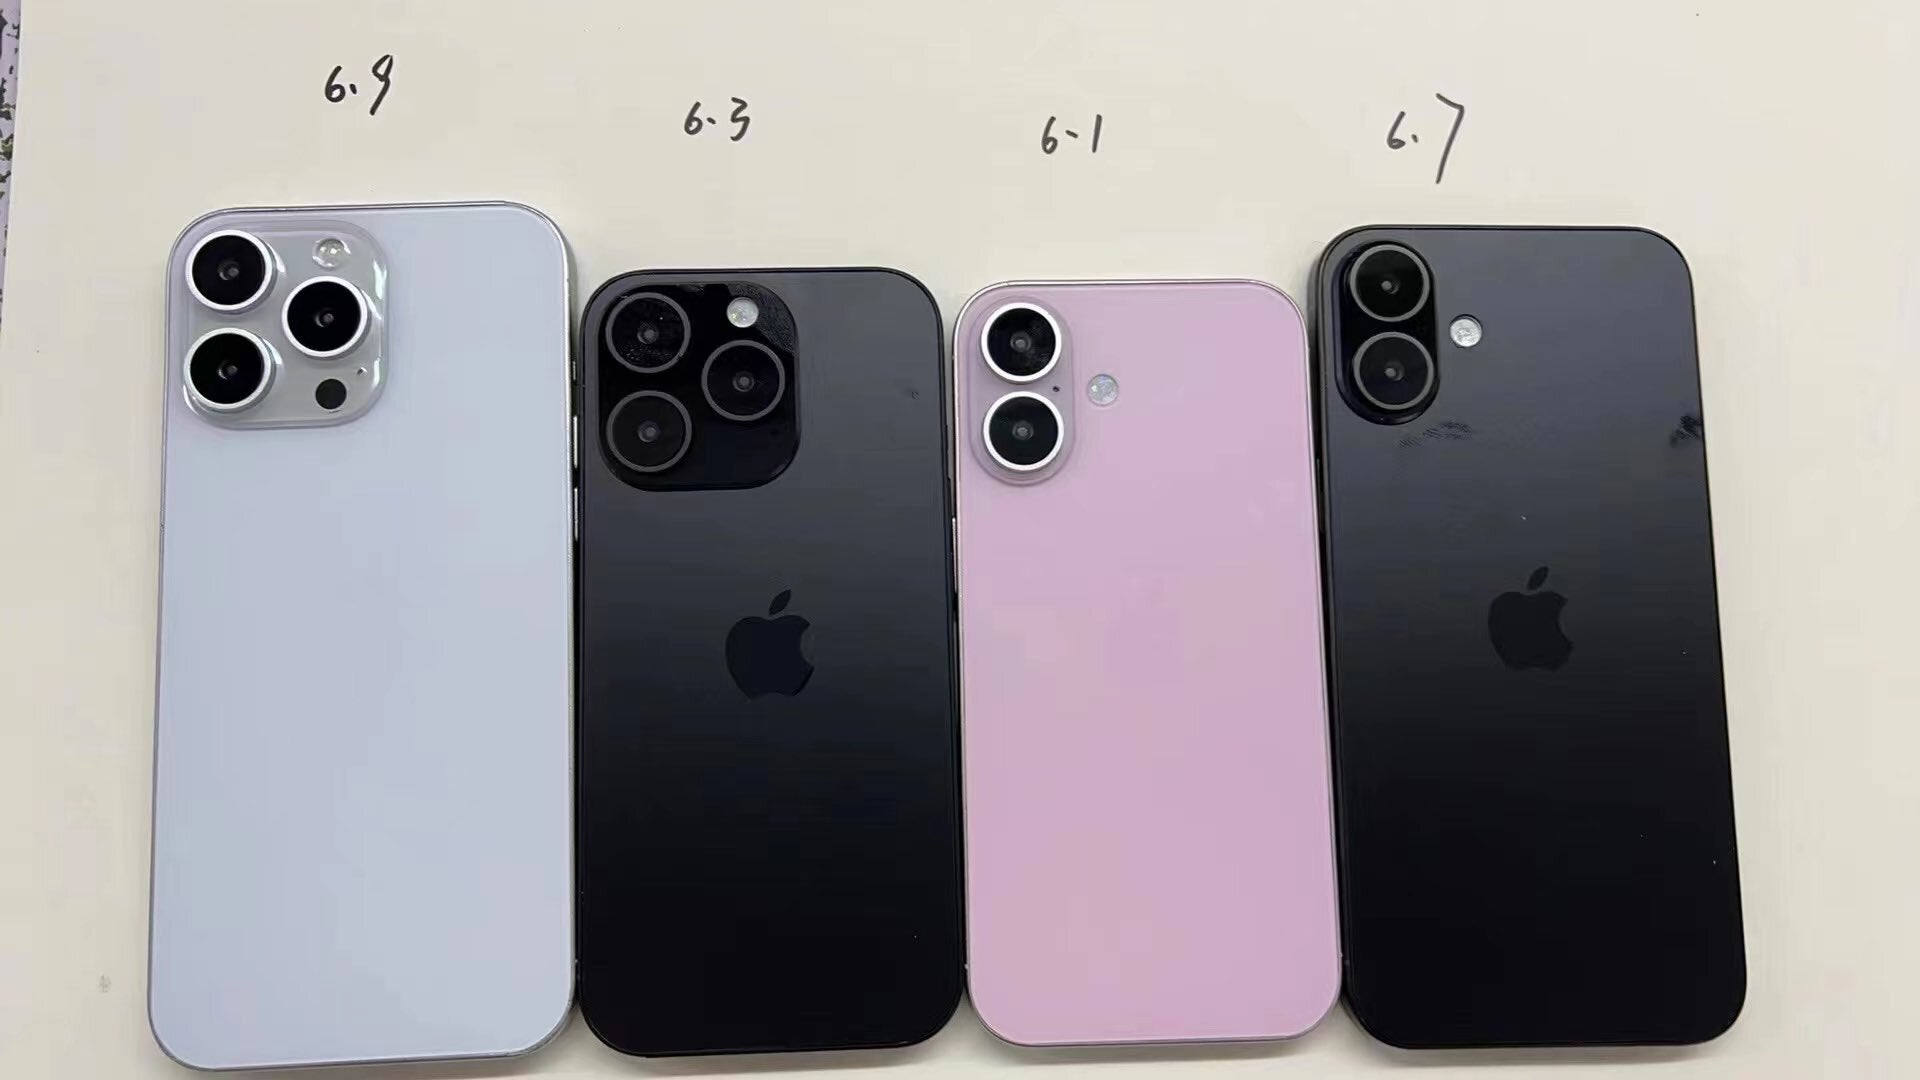 Leaked iPhone 16 series image shows how gigantic iPhone 16 Pro Max is